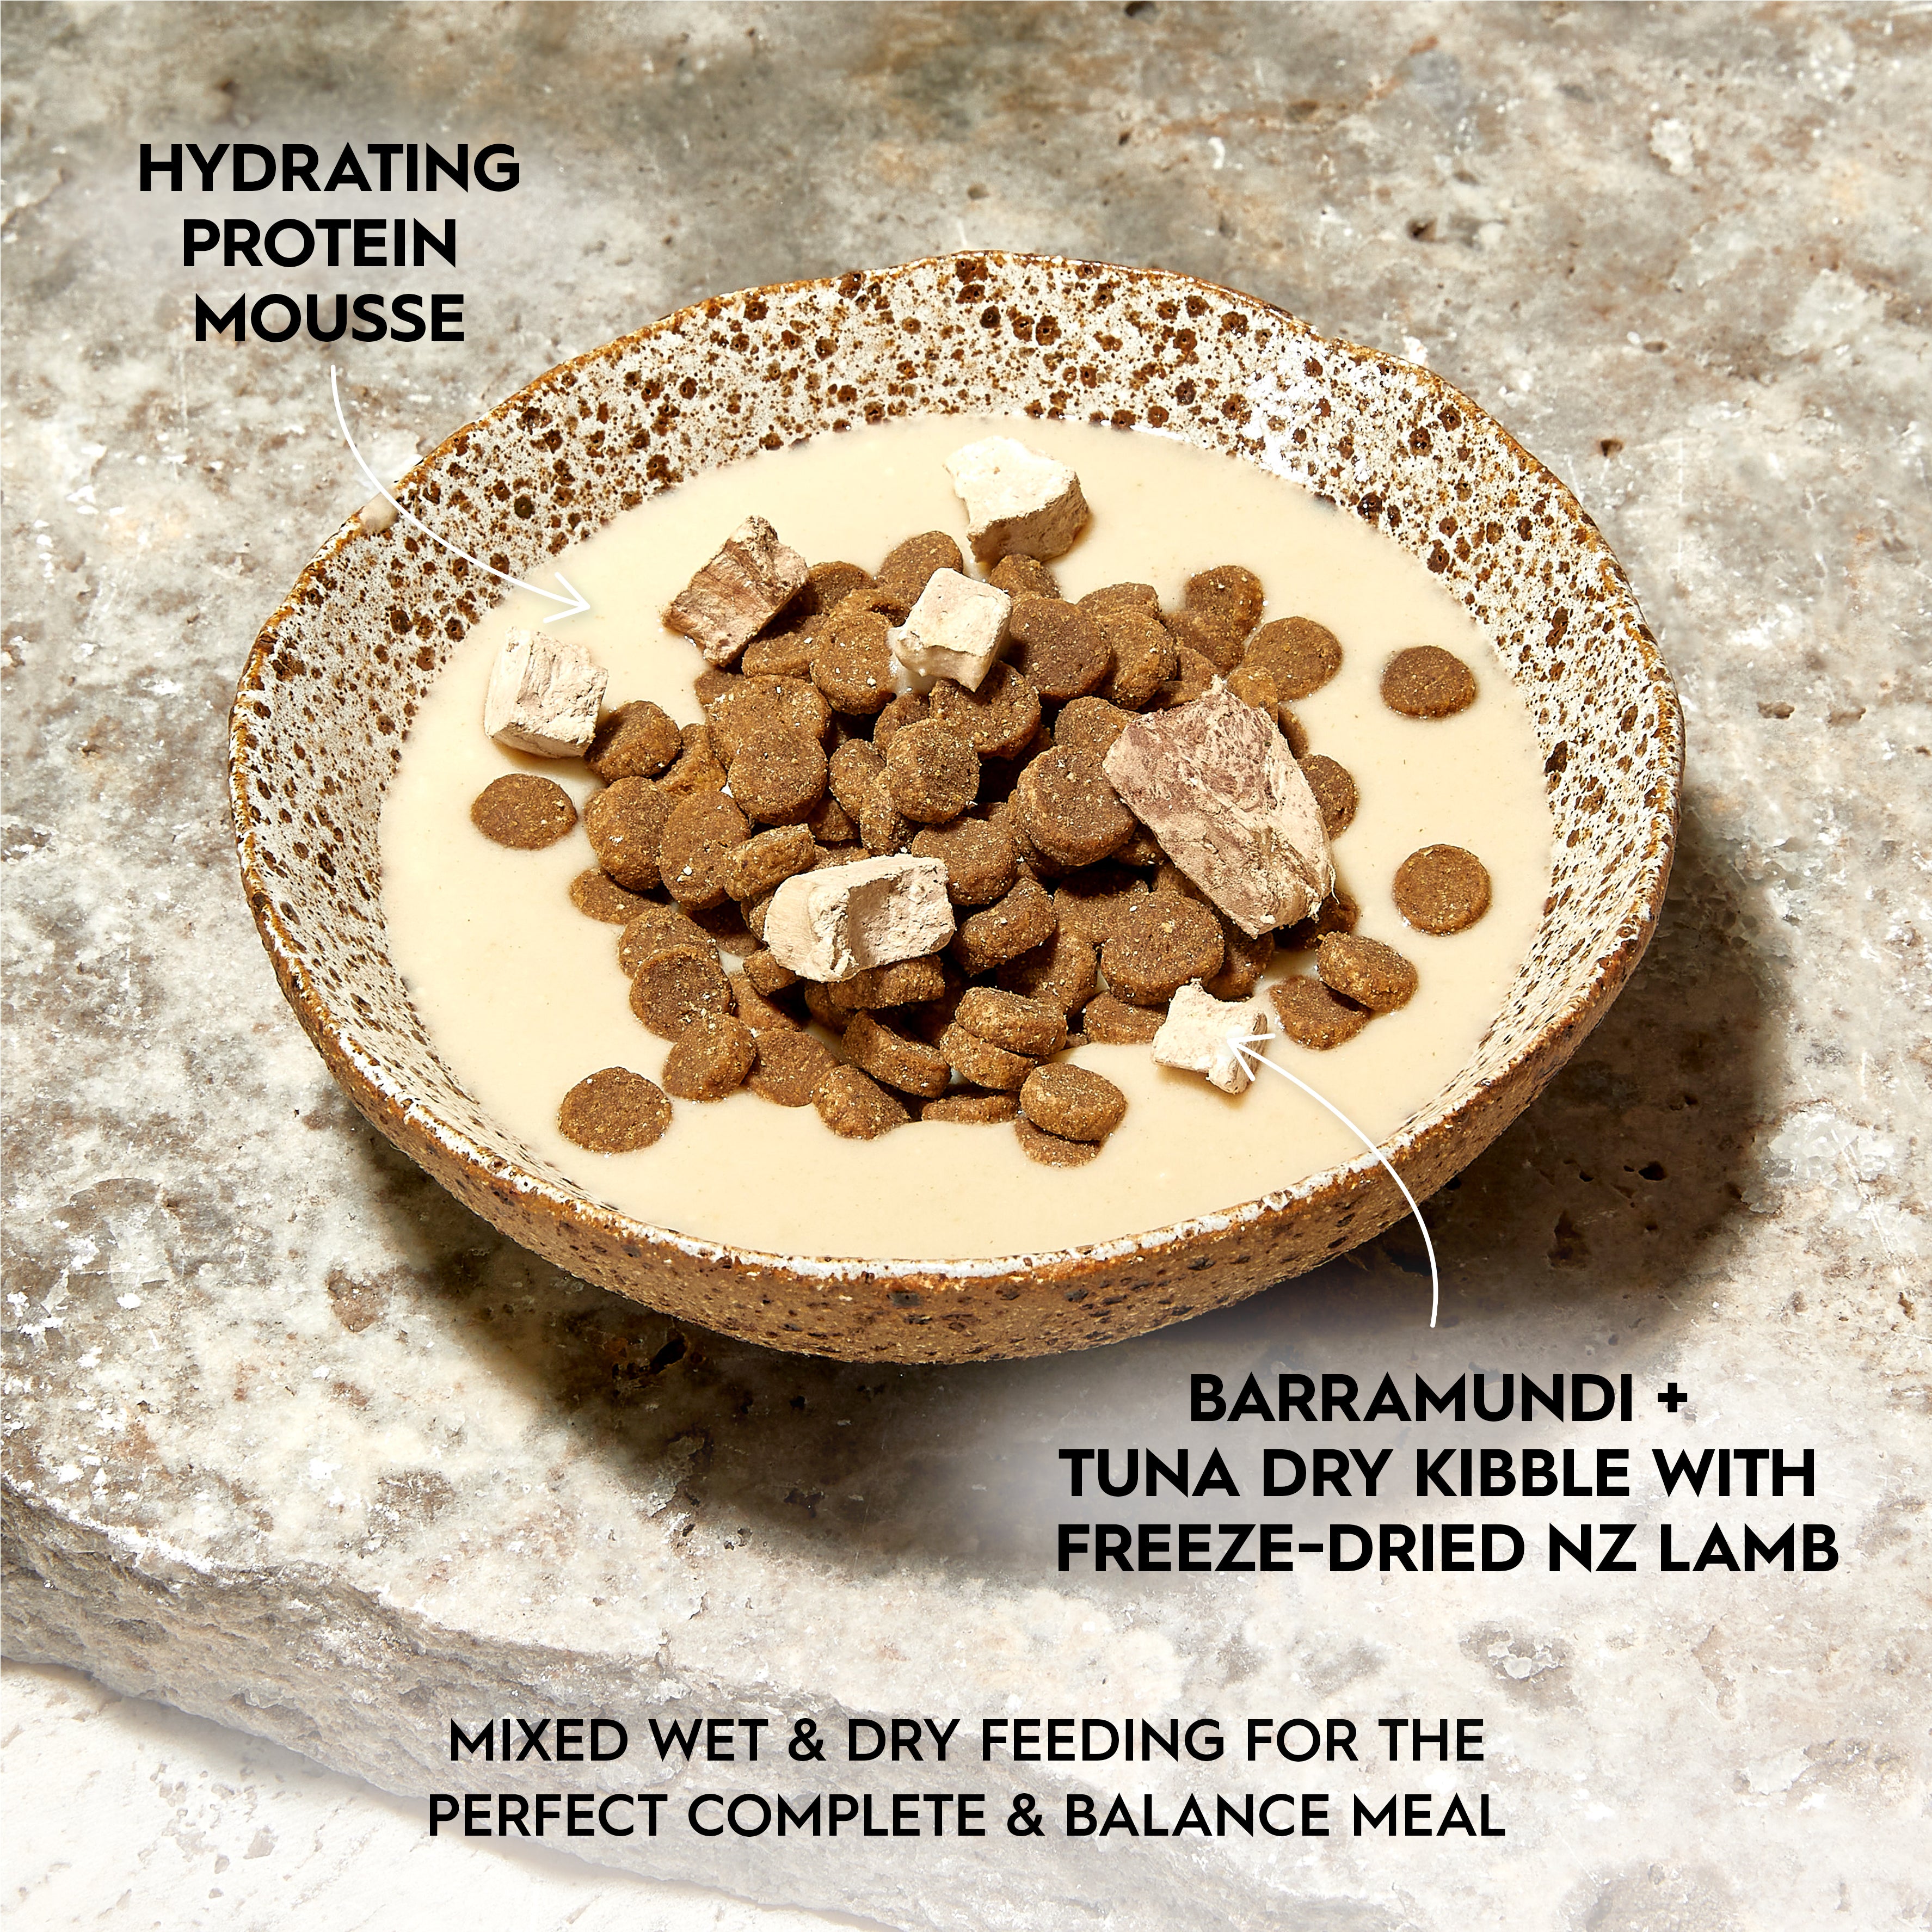 TRILOGY™ ADULT HYDRATING PROTEIN MOUSSE FARM RAISED CHICKEN 85G